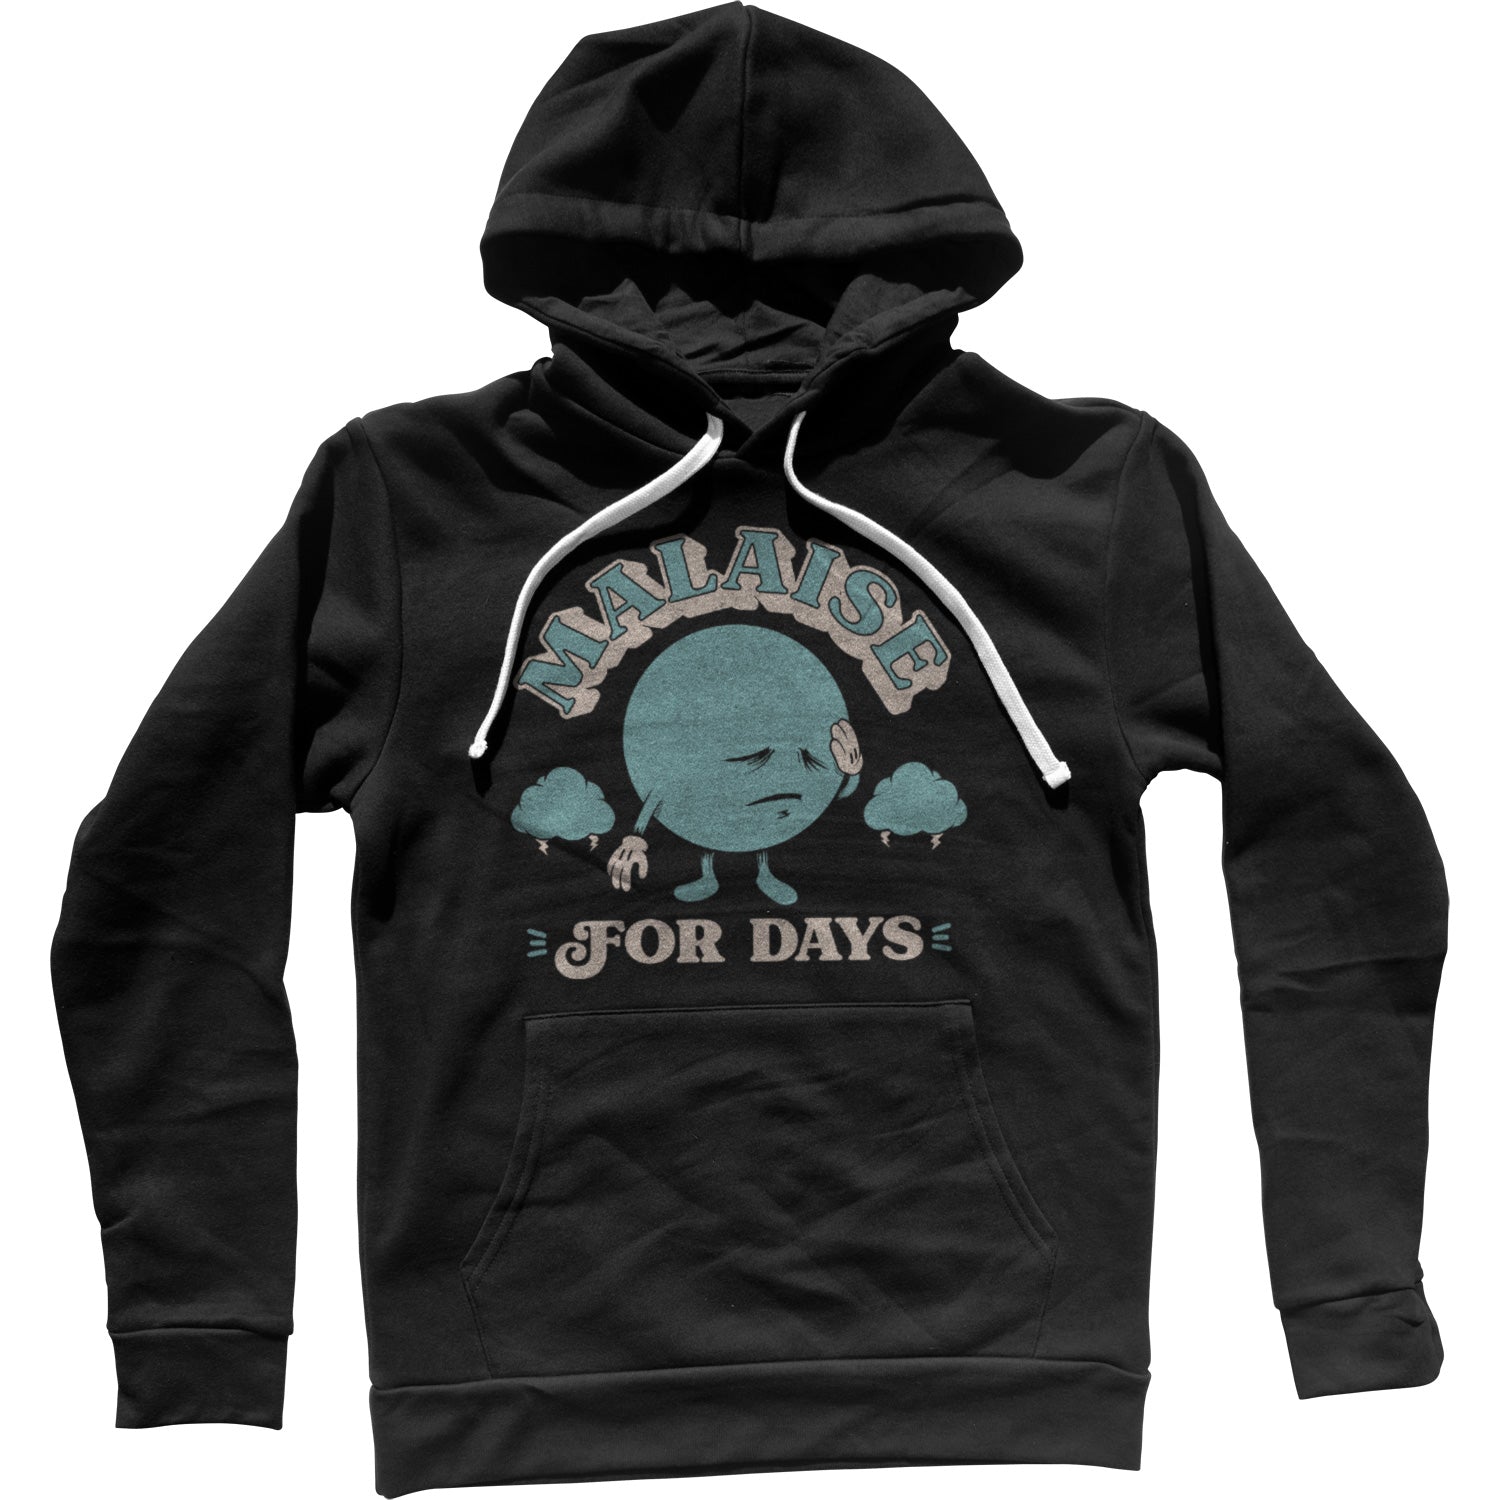 Malaise For Days Unisex Hoodie